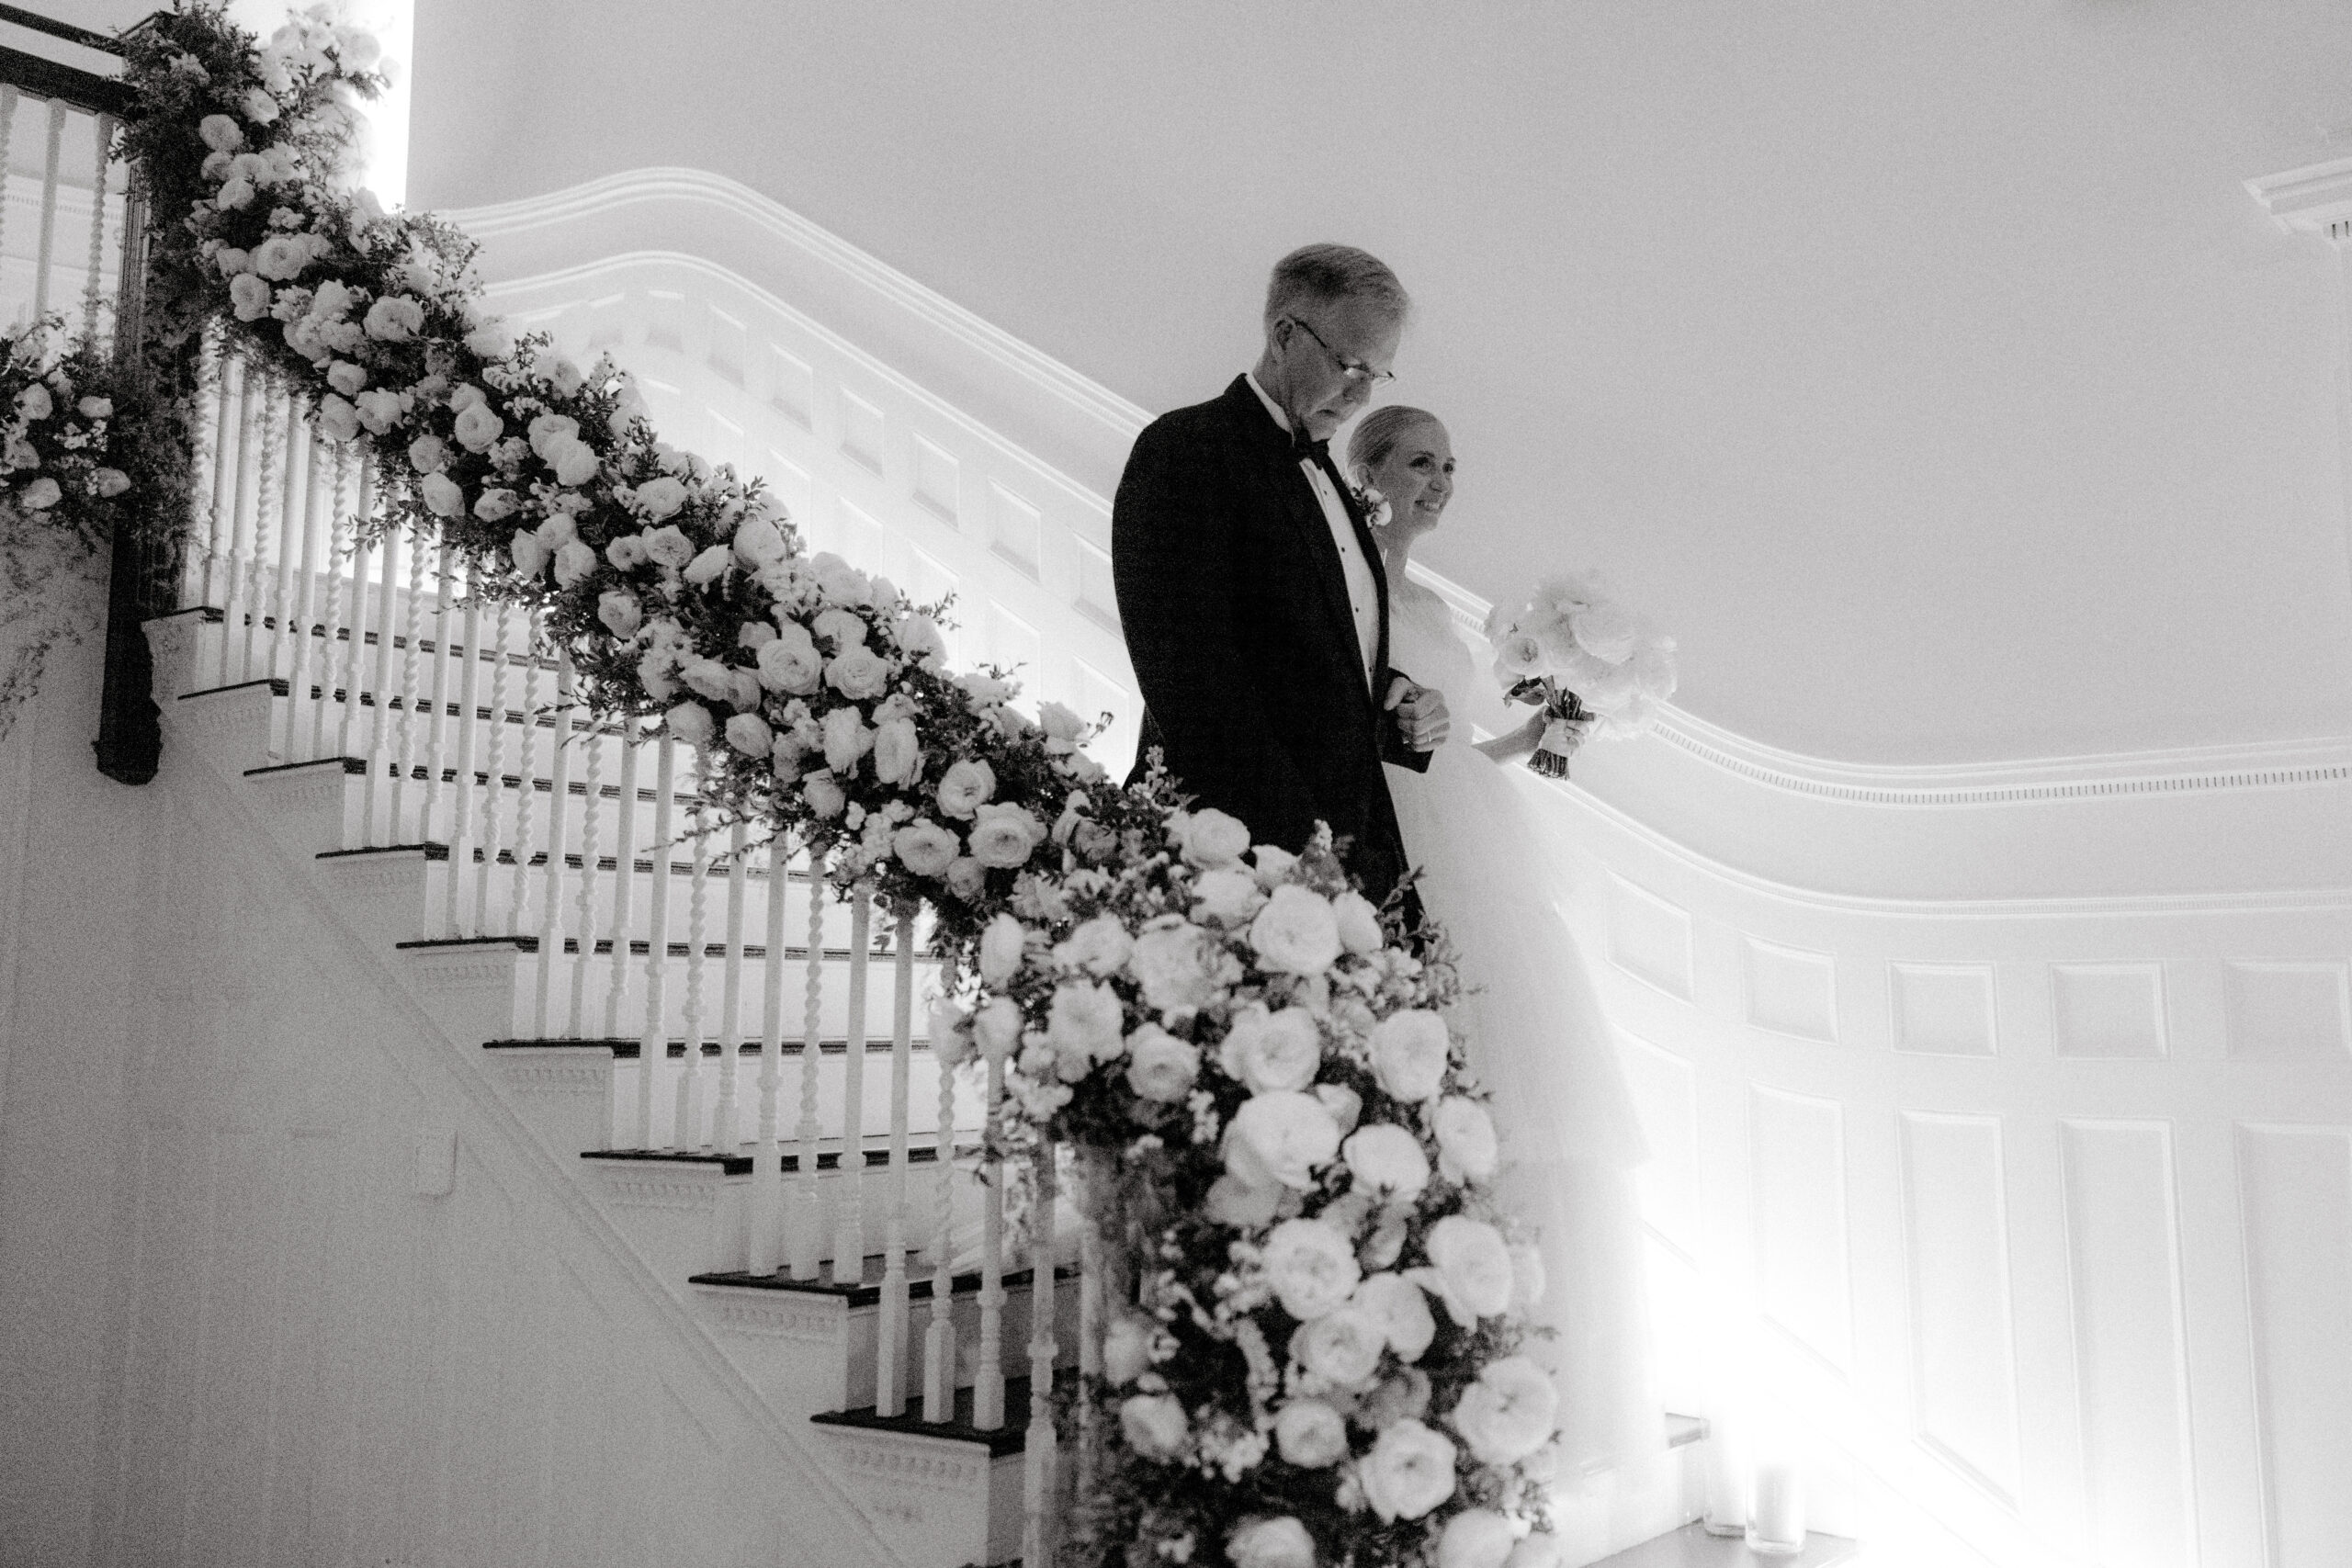 The bride and her father are walking down the staircase. Wedding Trends image by Jenny Fu Studio